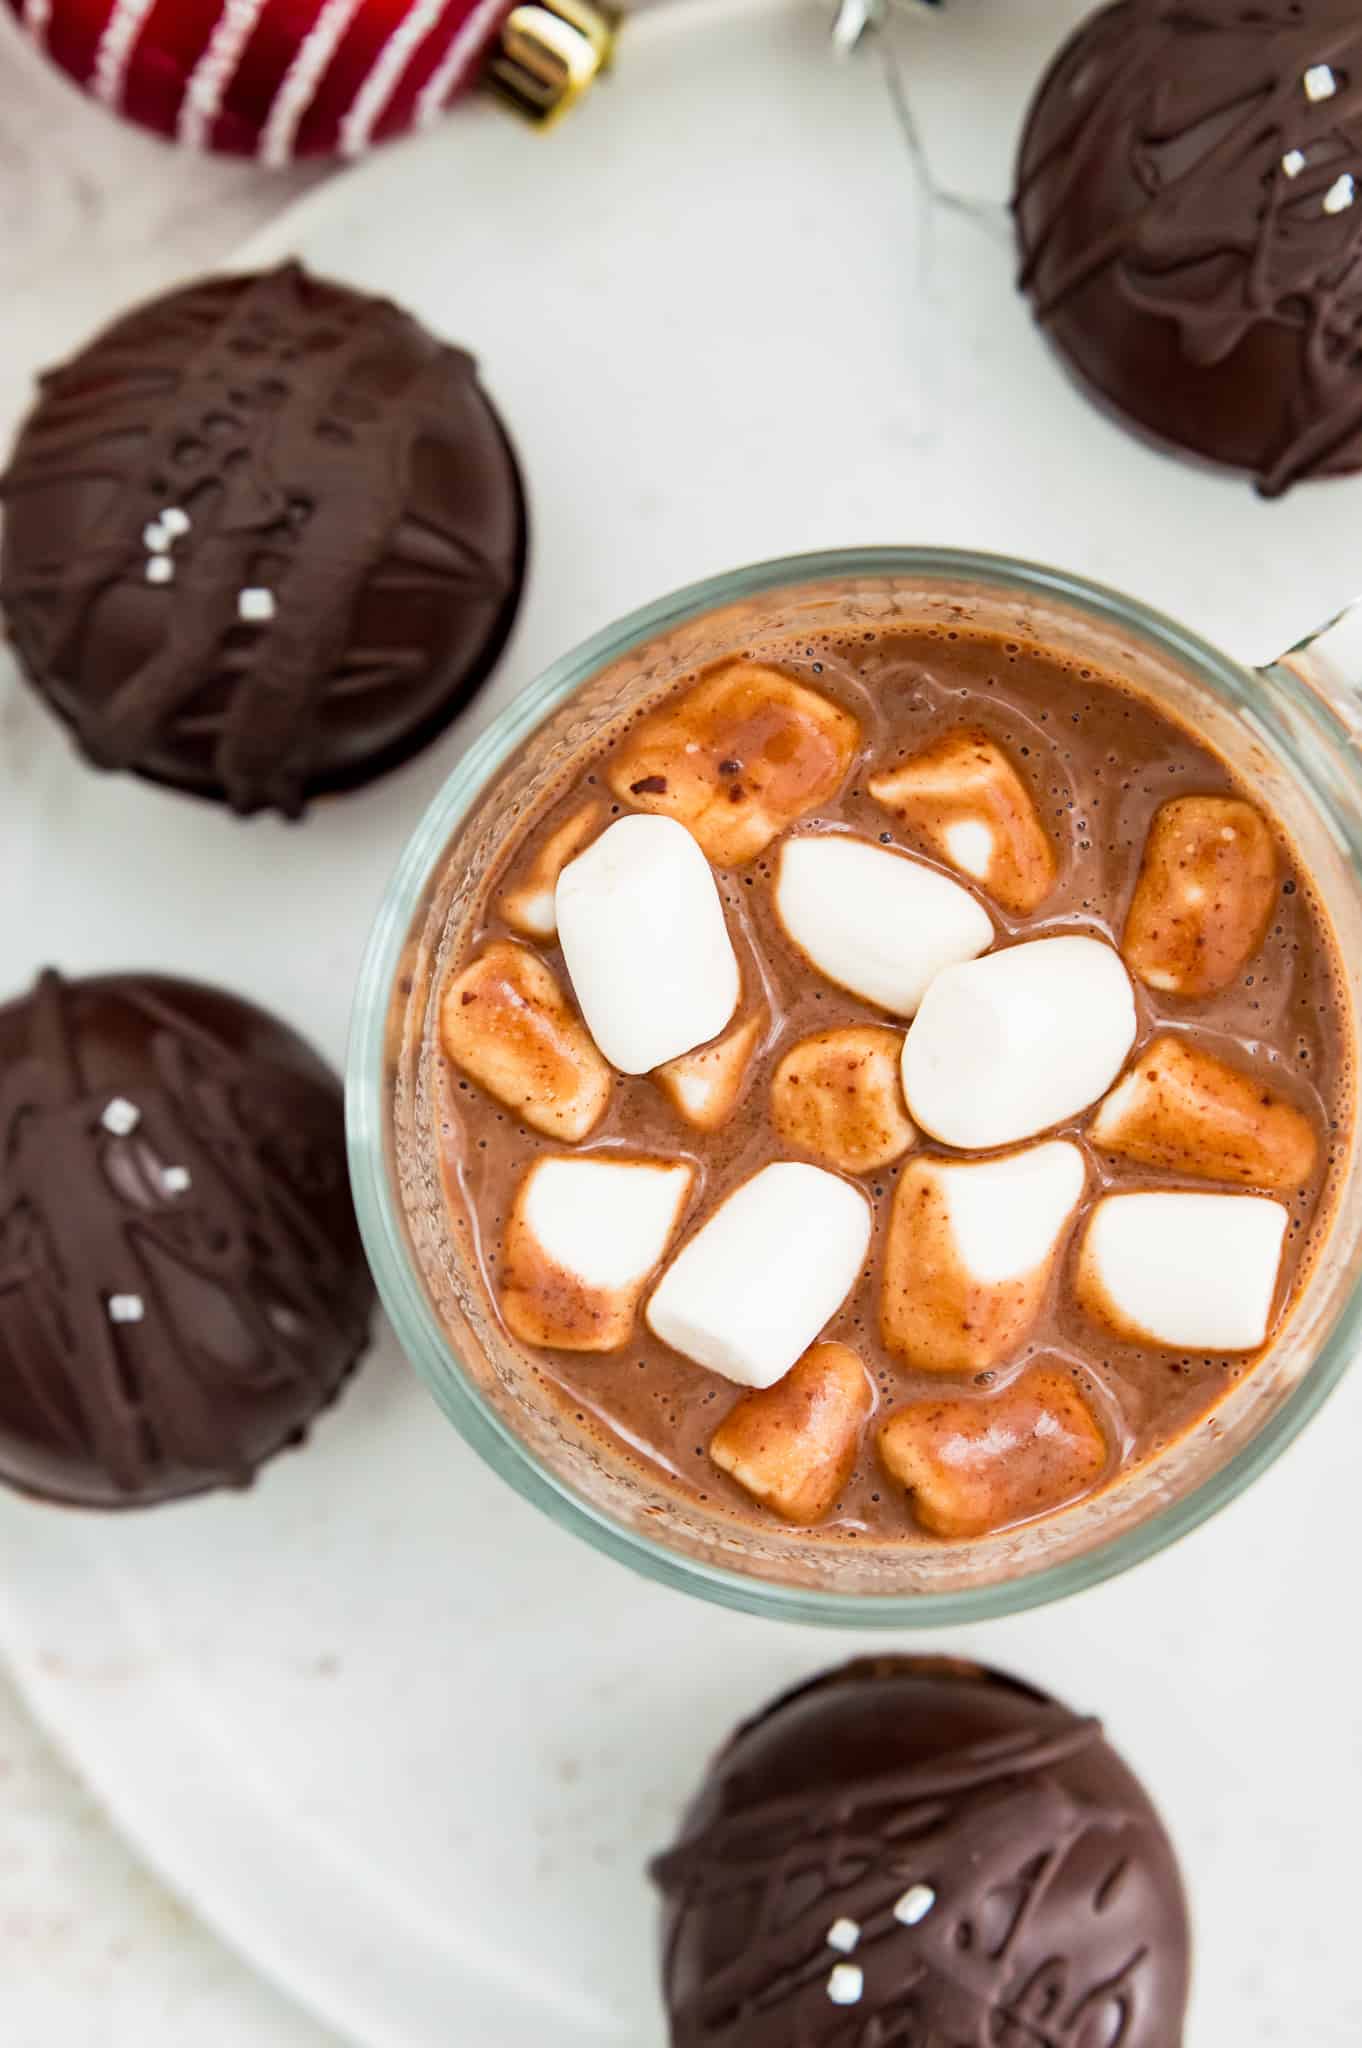 A mug of hot chocolate made from a vegan hot chocolate bomb and topped with marshmallows